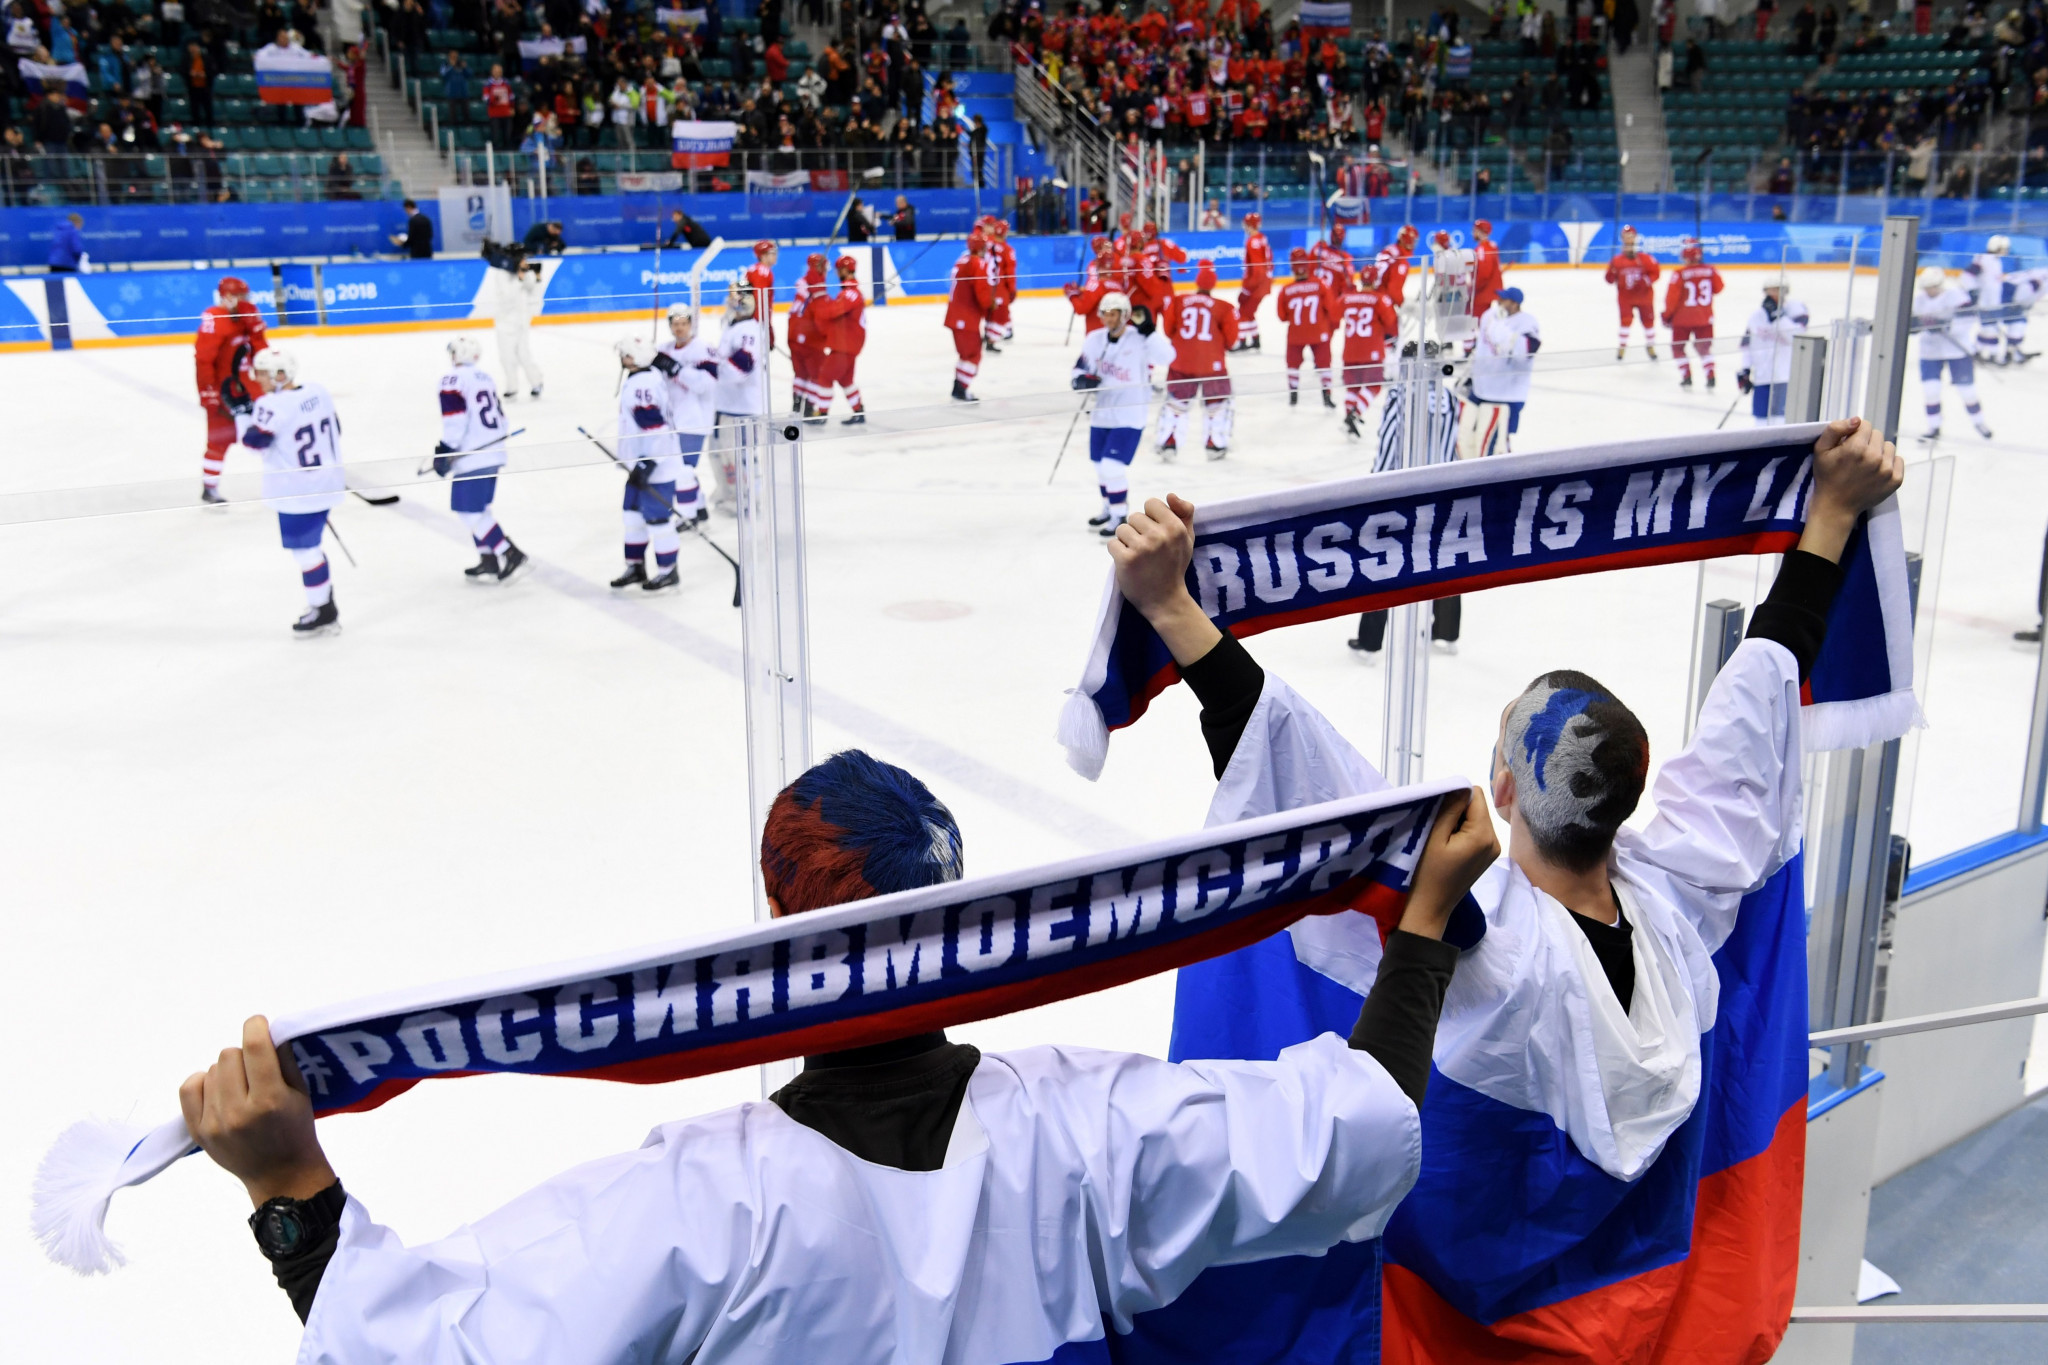 Russian supporters cheer on the OAR team as they beat Czech Republic in the men's ice hockey today